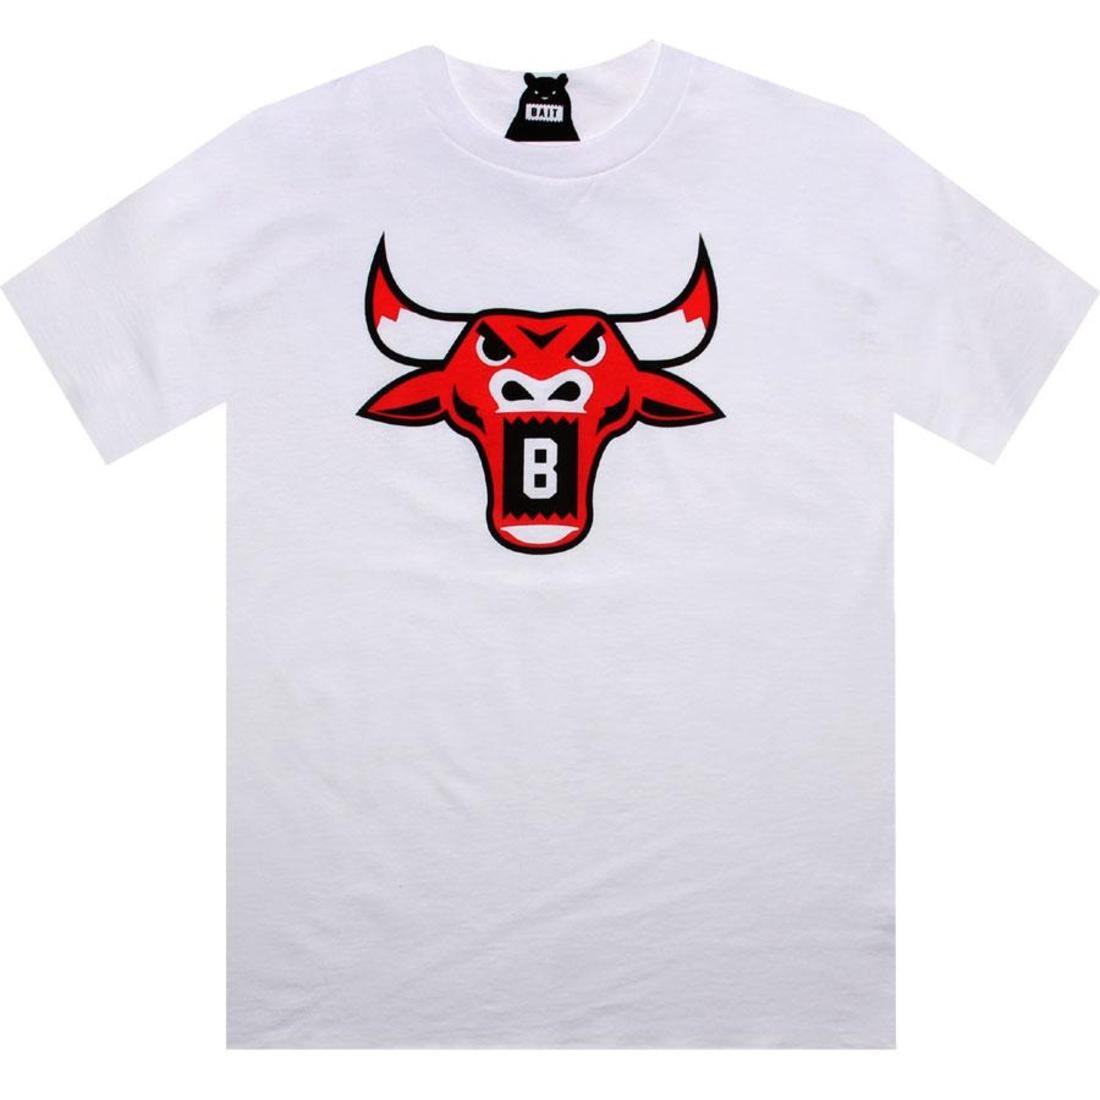 Cheap Atelier-lumieres Jordan Outlet Bull Tee (white / red)